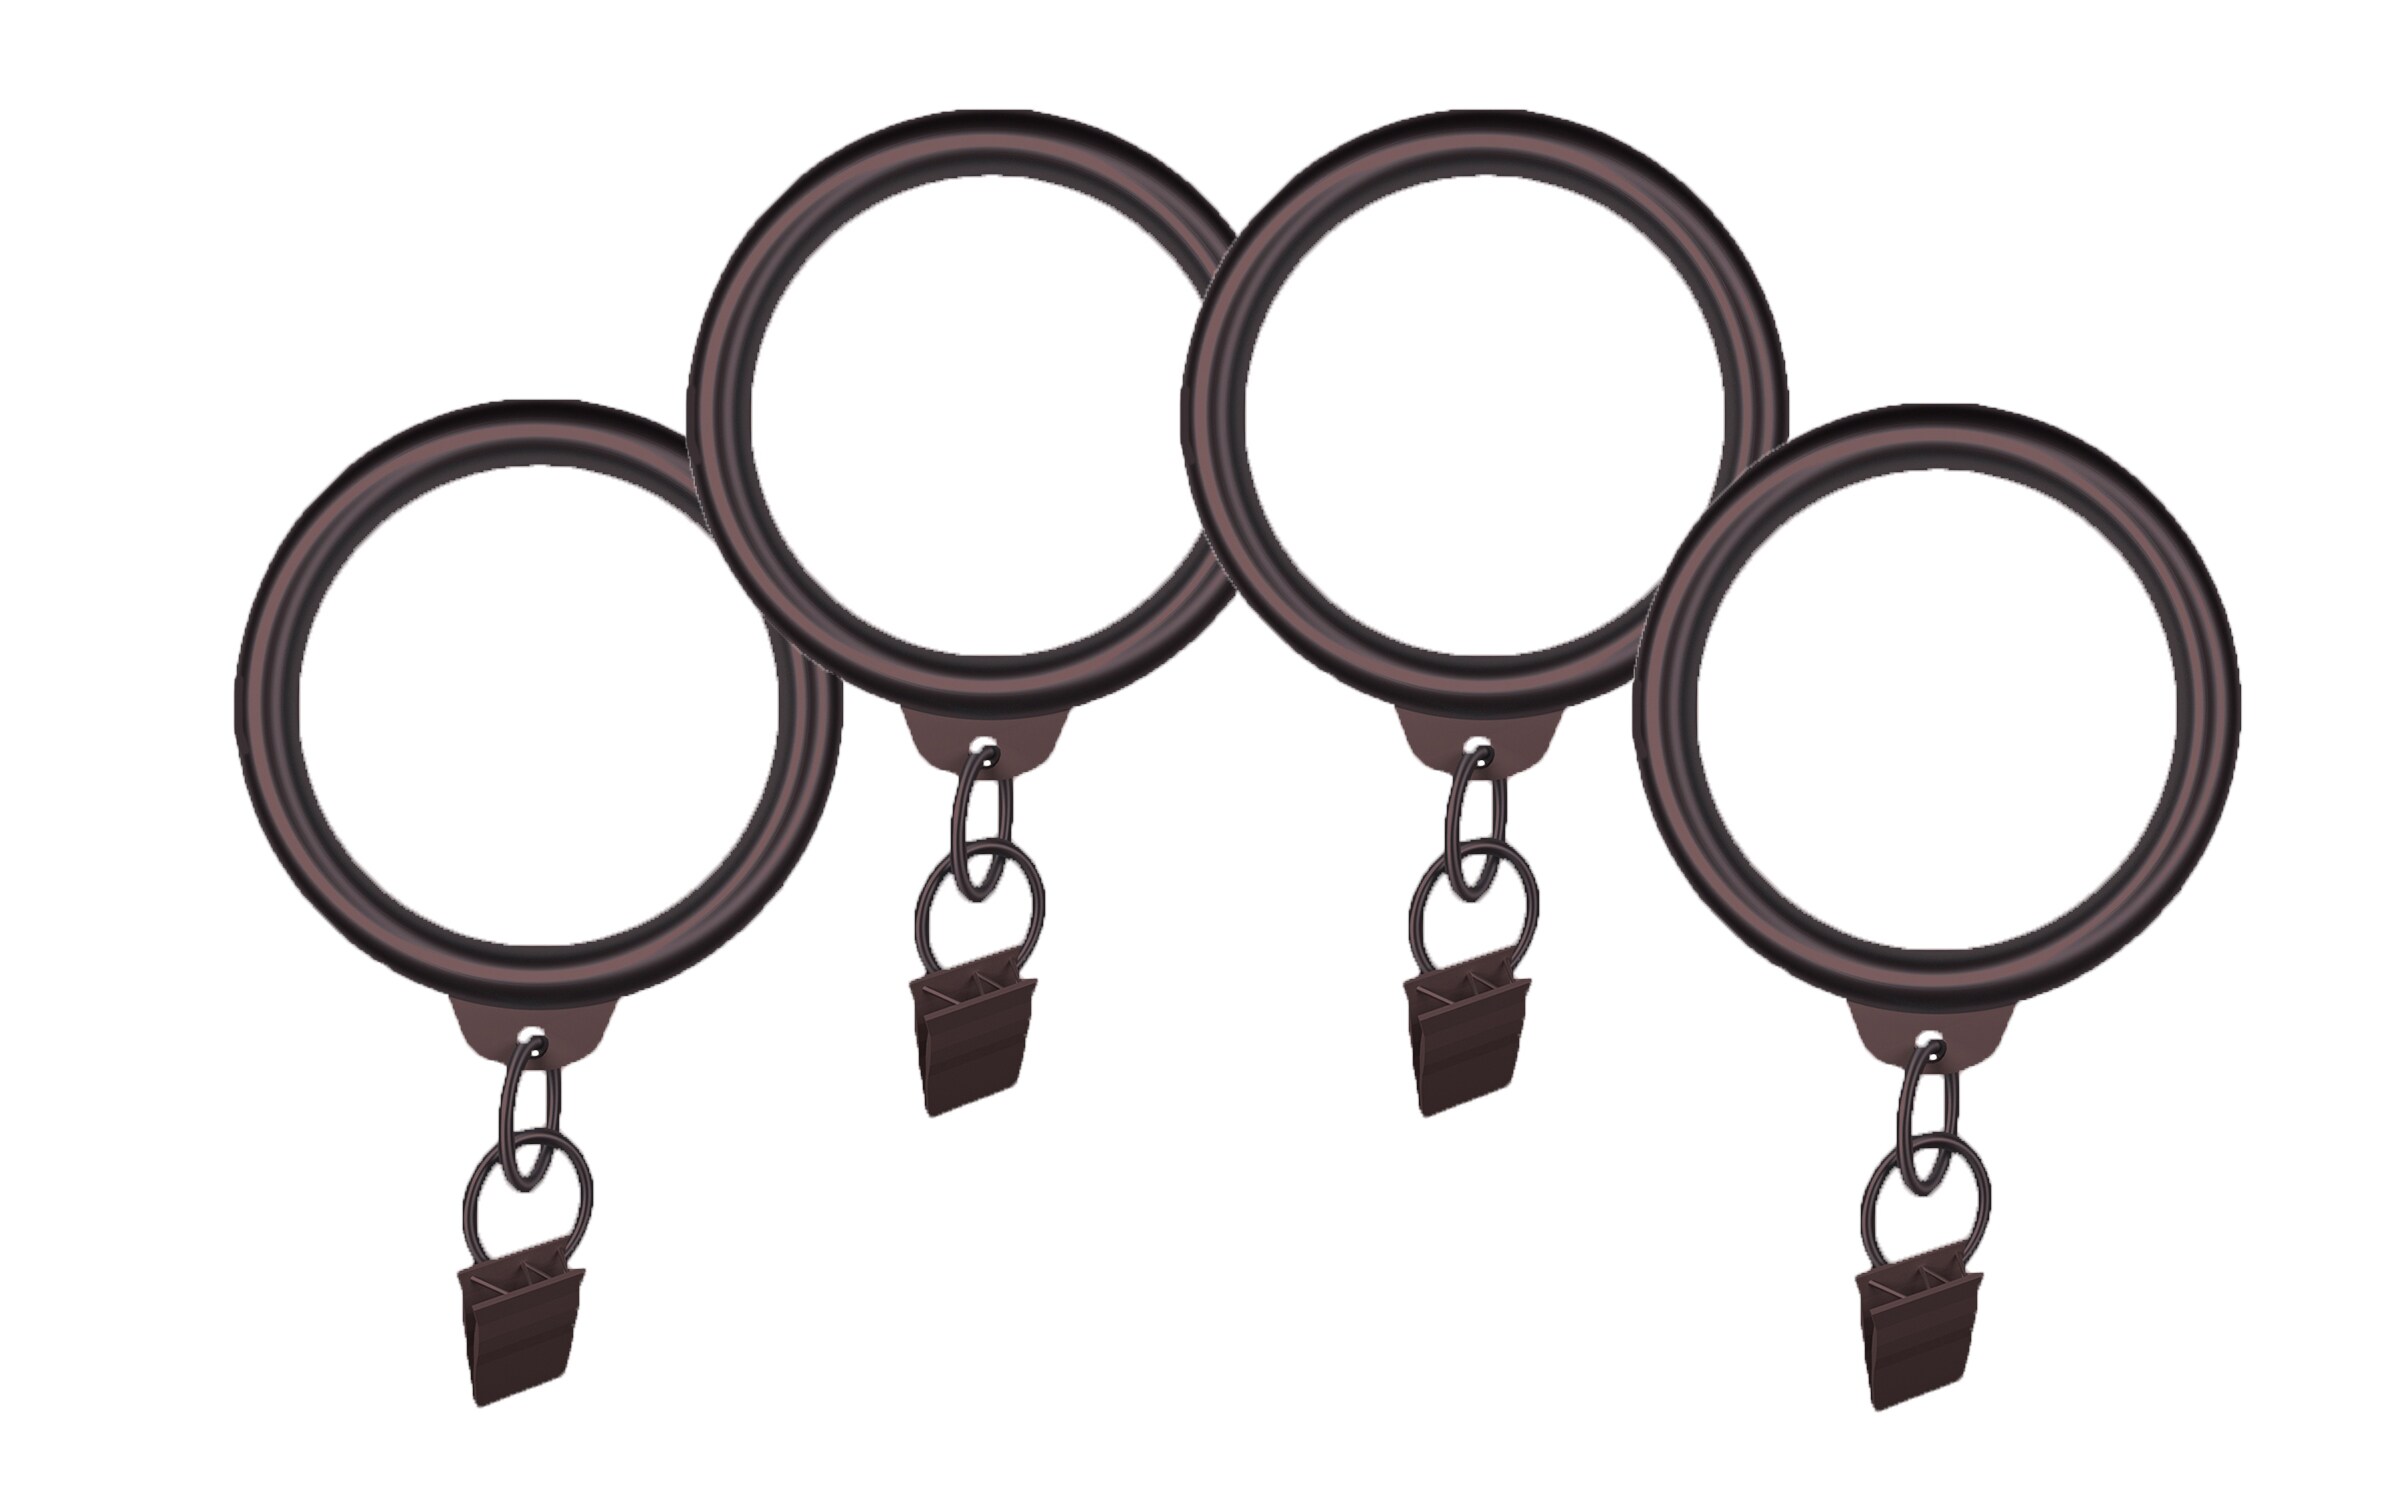 Roth 7 Pack Oil-Rubbed Bronze Curtain Rings 275143 26706-BW Allen 